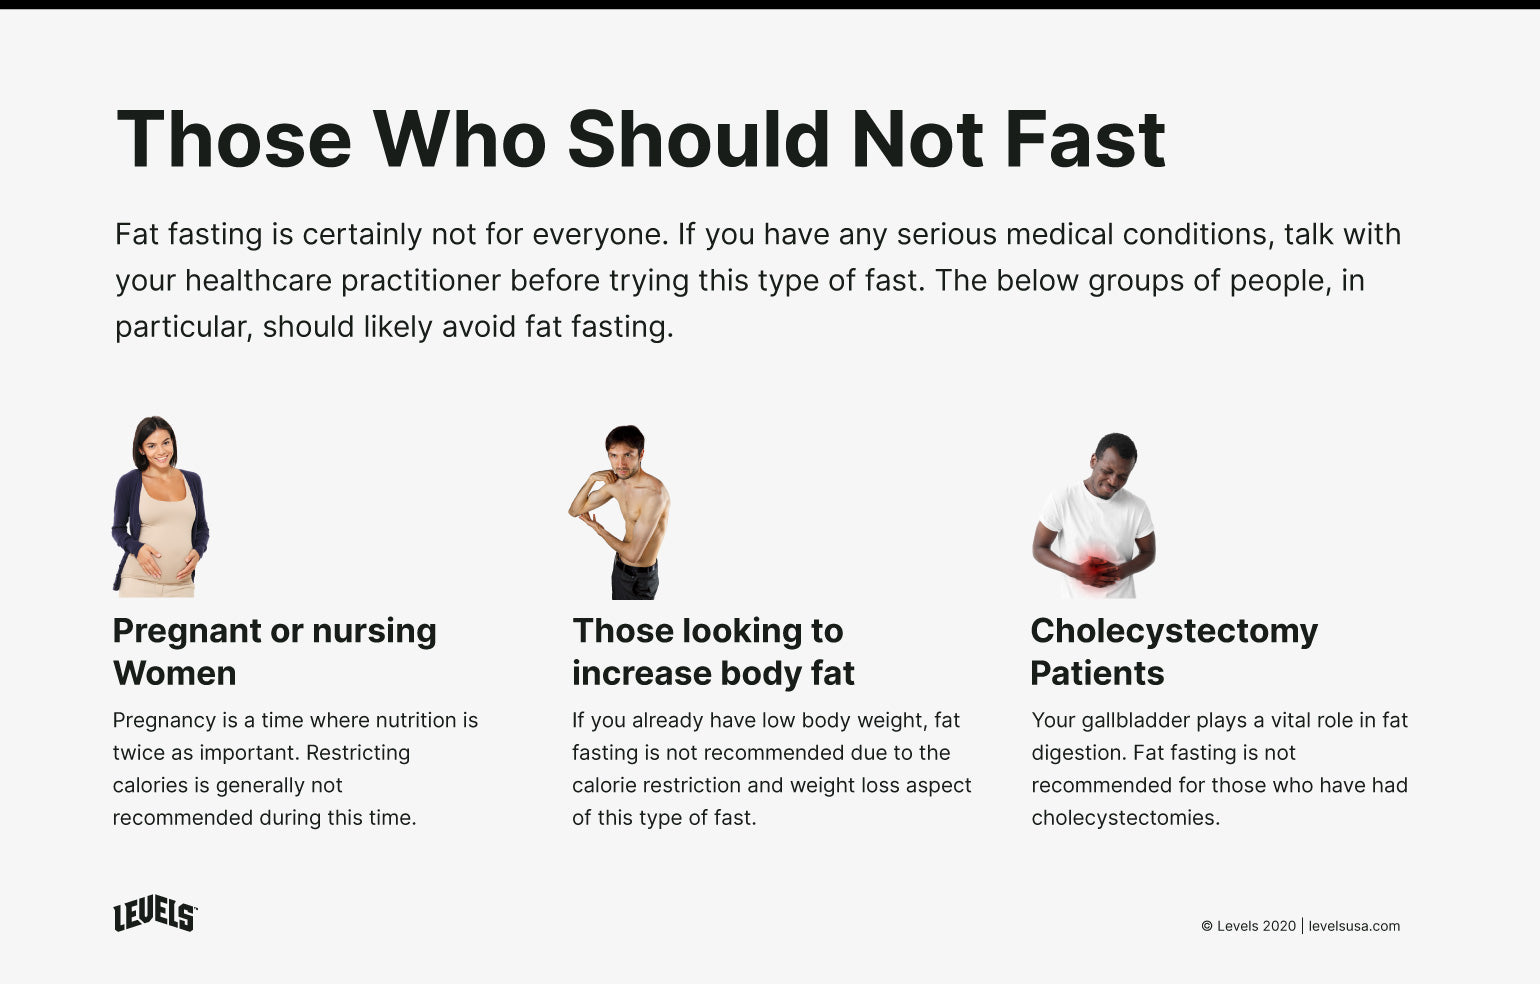 Groups of People Who Should Not Fat Fast - Infographic